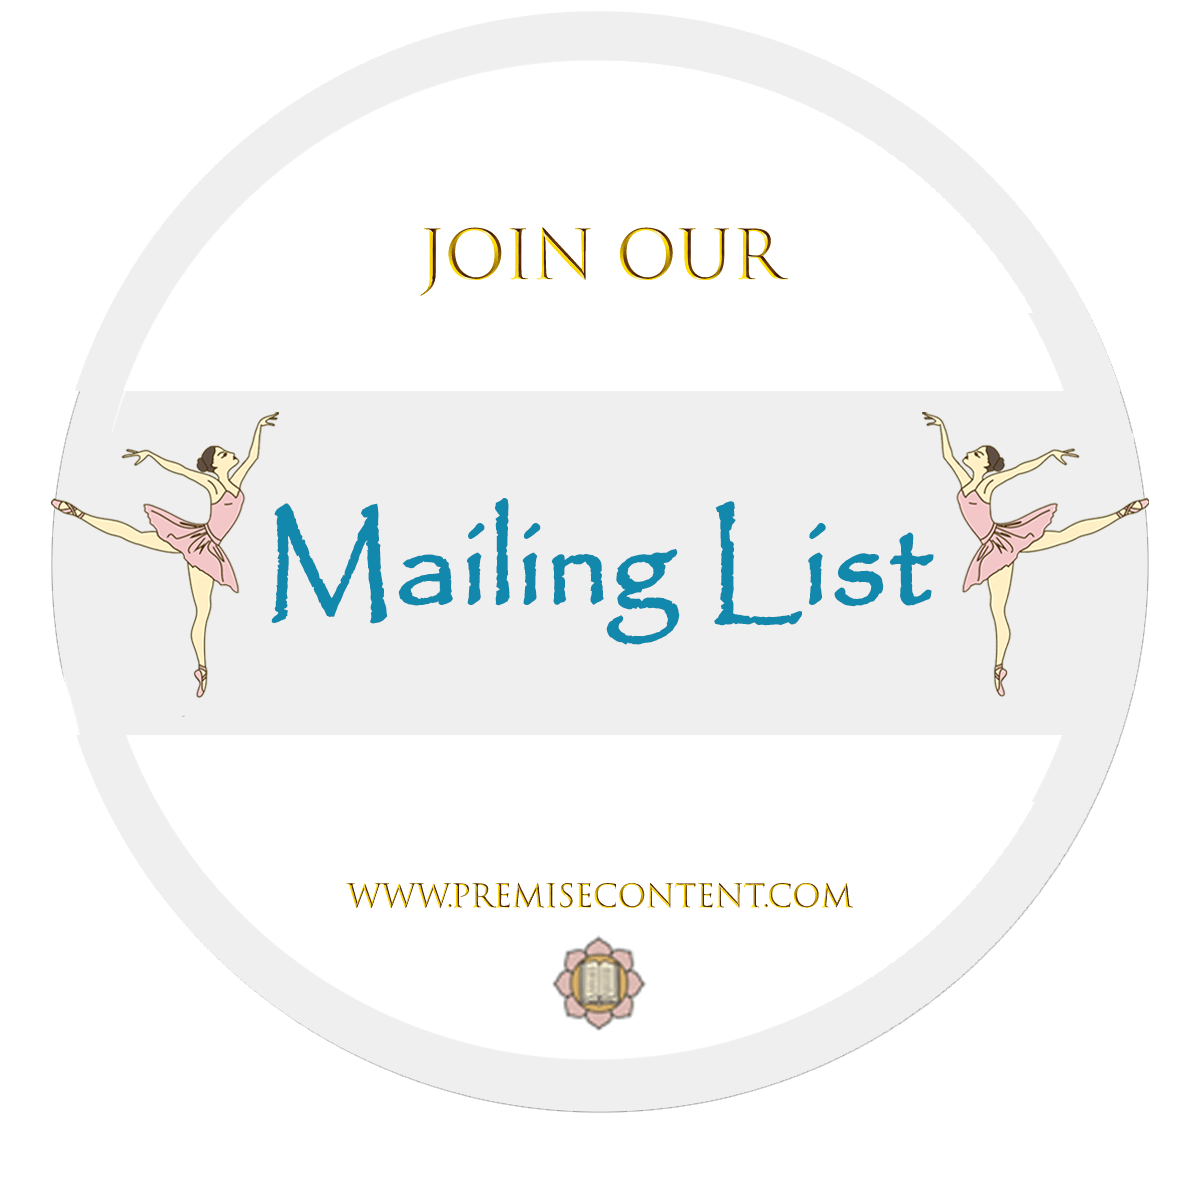 Premise Content logo, website address and the words Join Our Mailing List with two small ballerinas in pink surrounding the words Mailing List.